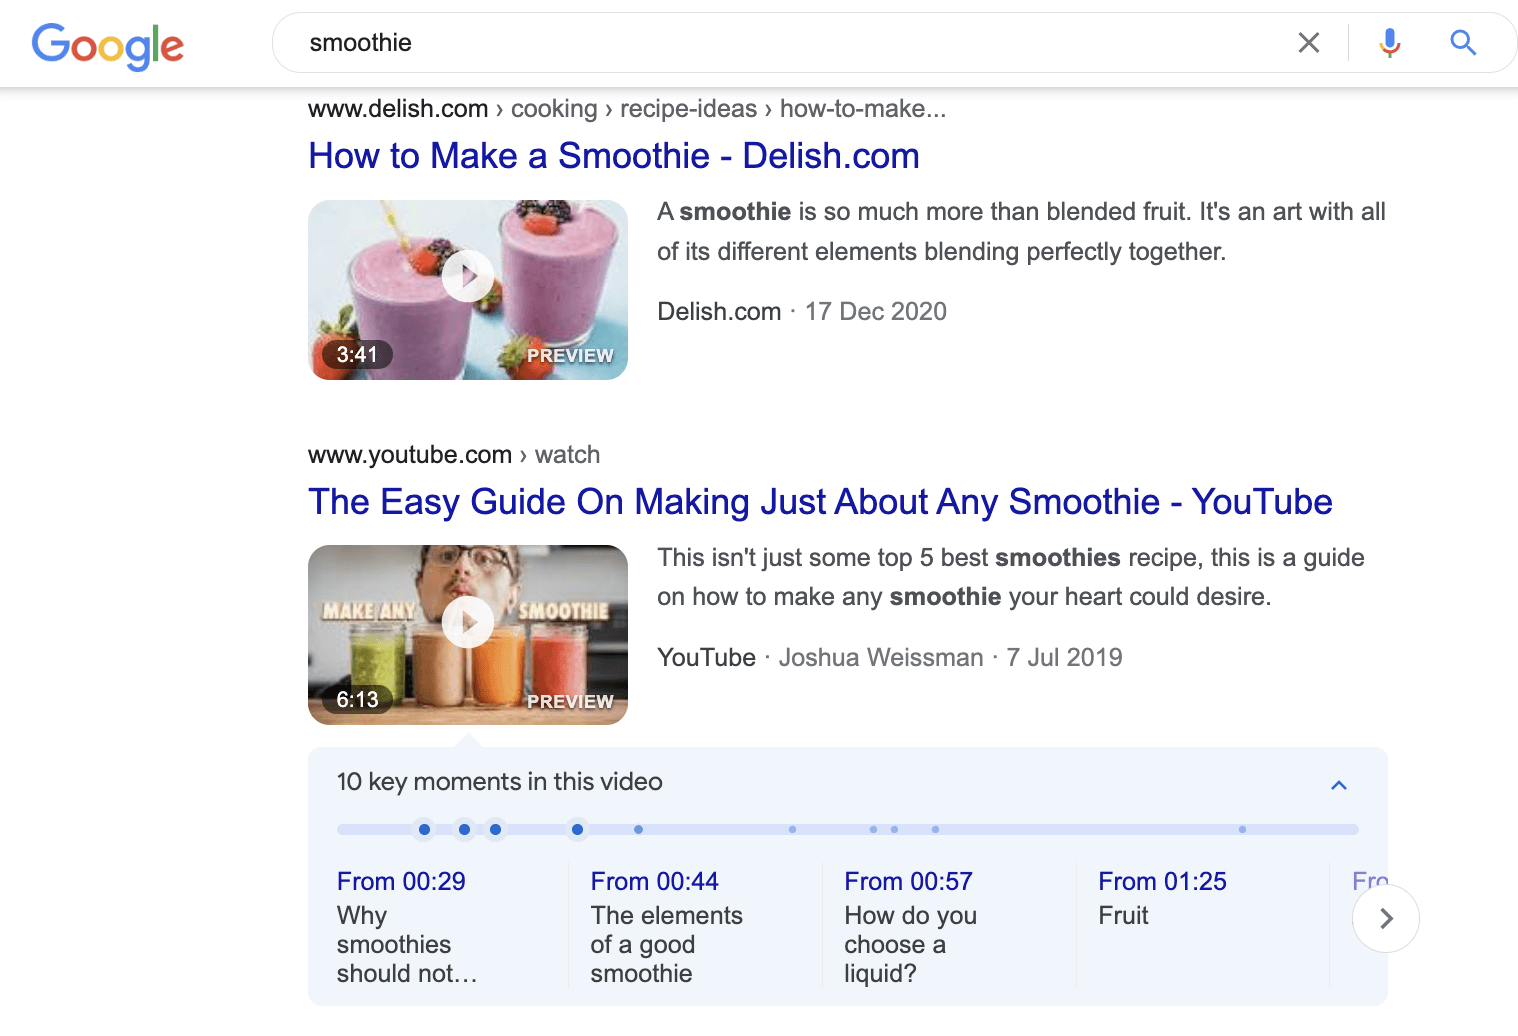 Video search results for “smoothie”.